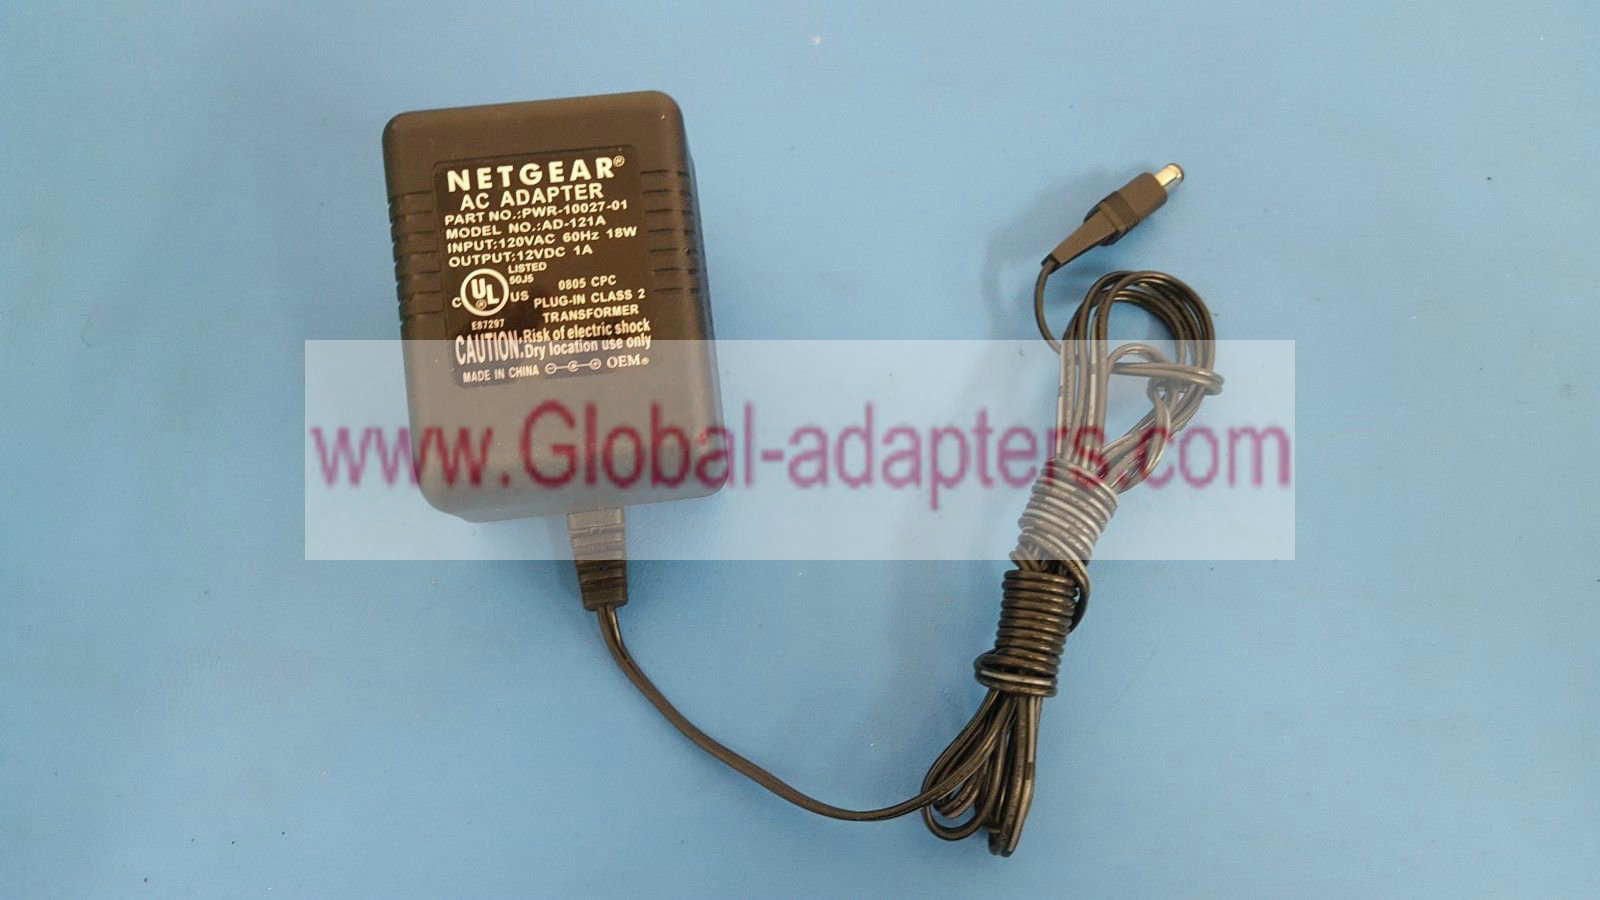 NEW NETGEAR PWR-10027-01 AD-121A1 12VDC 1A AC ADAPTER power supply - Click Image to Close